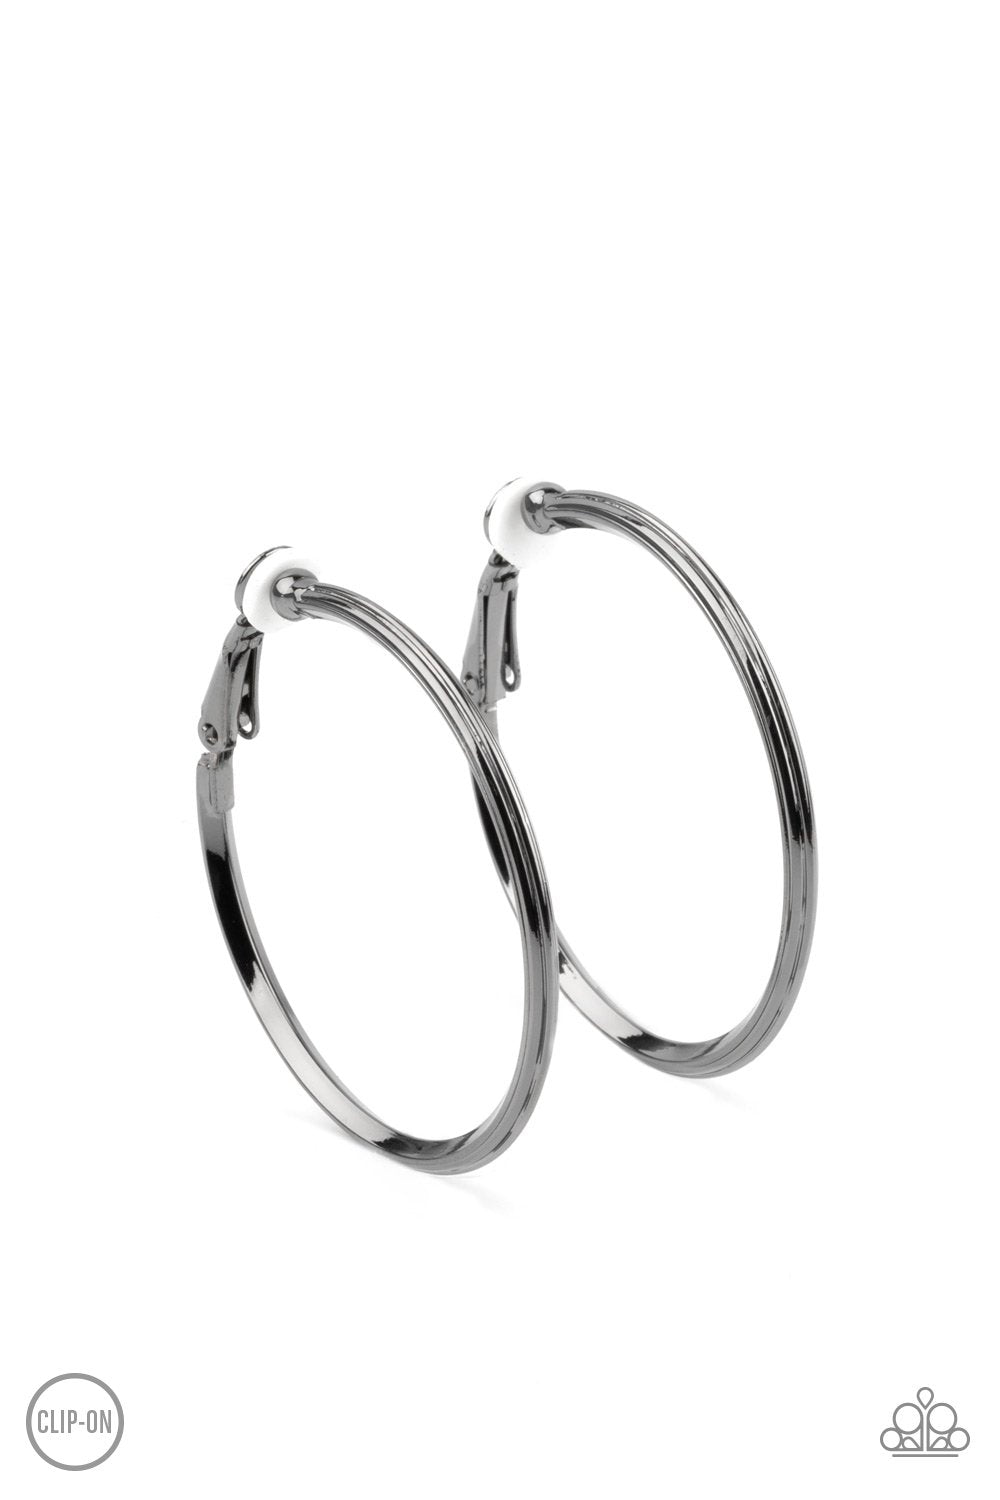 City Classic Gunmetal Black Clip-on Hoop Earrings - Paparazzi Accessories - lightbox -CarasShop.com - $5 Jewelry by Cara Jewels